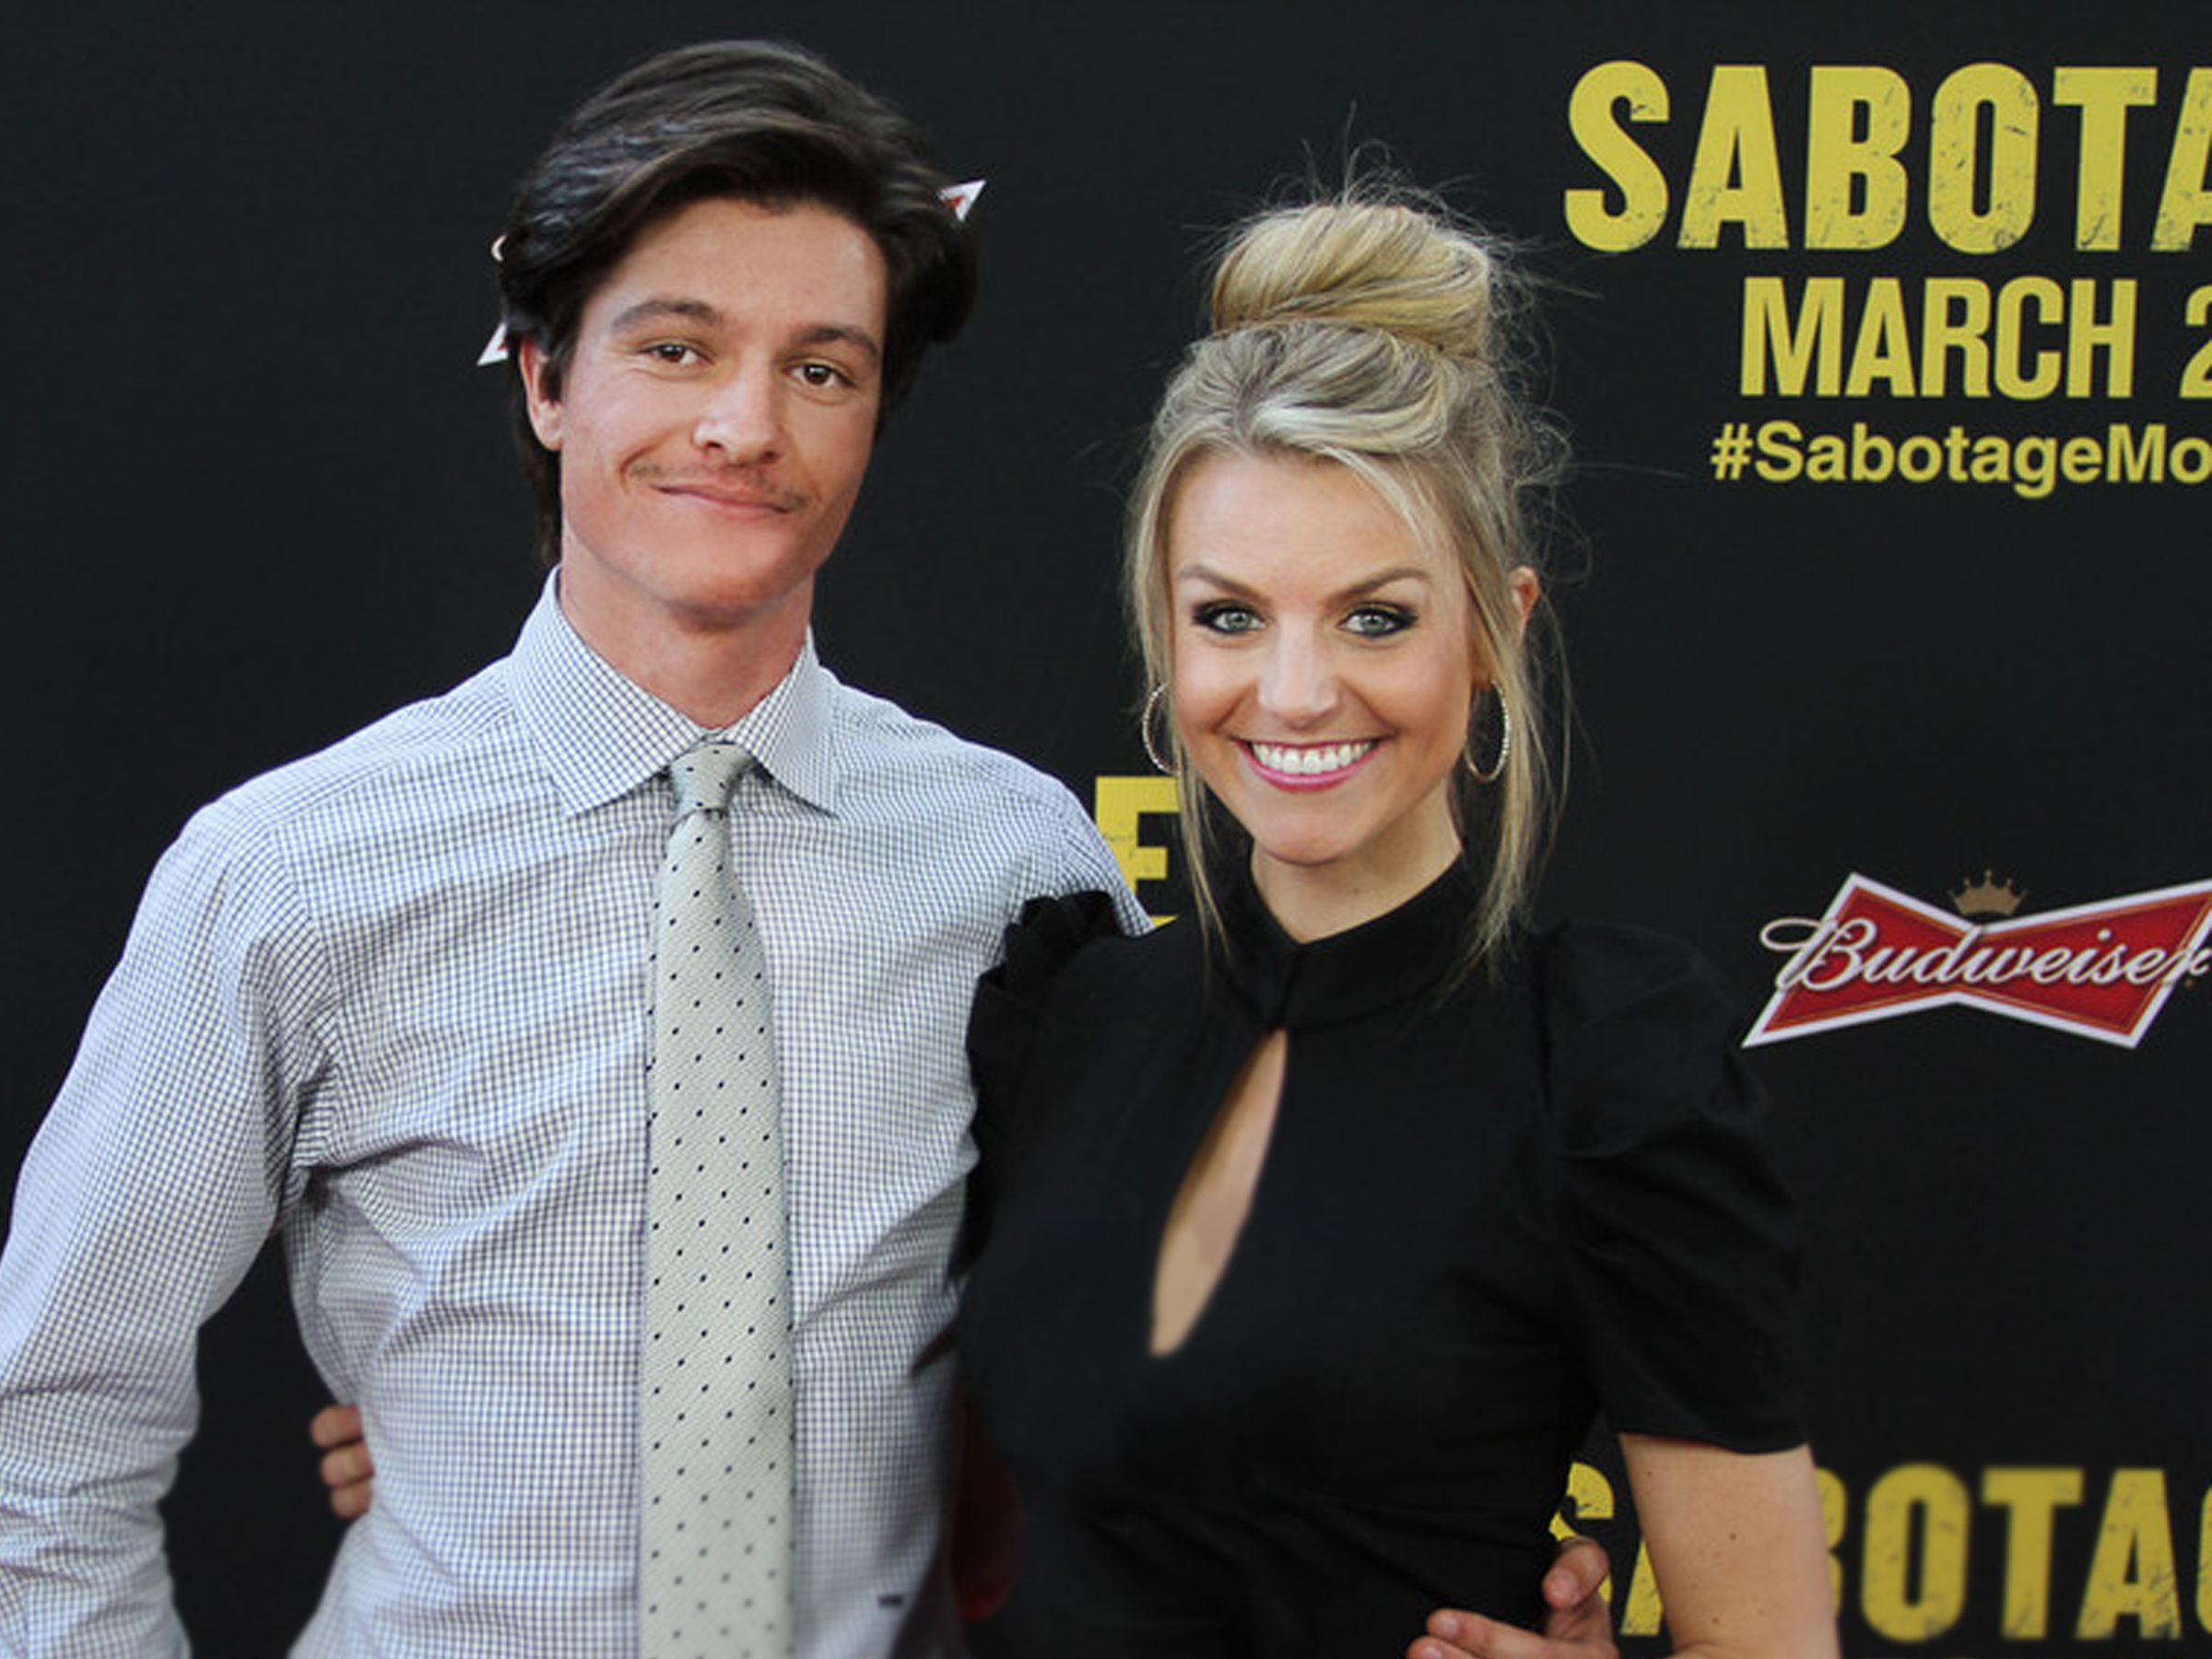 Nicolas Wendl and Jessica Carroll at the Sabotage Premiere